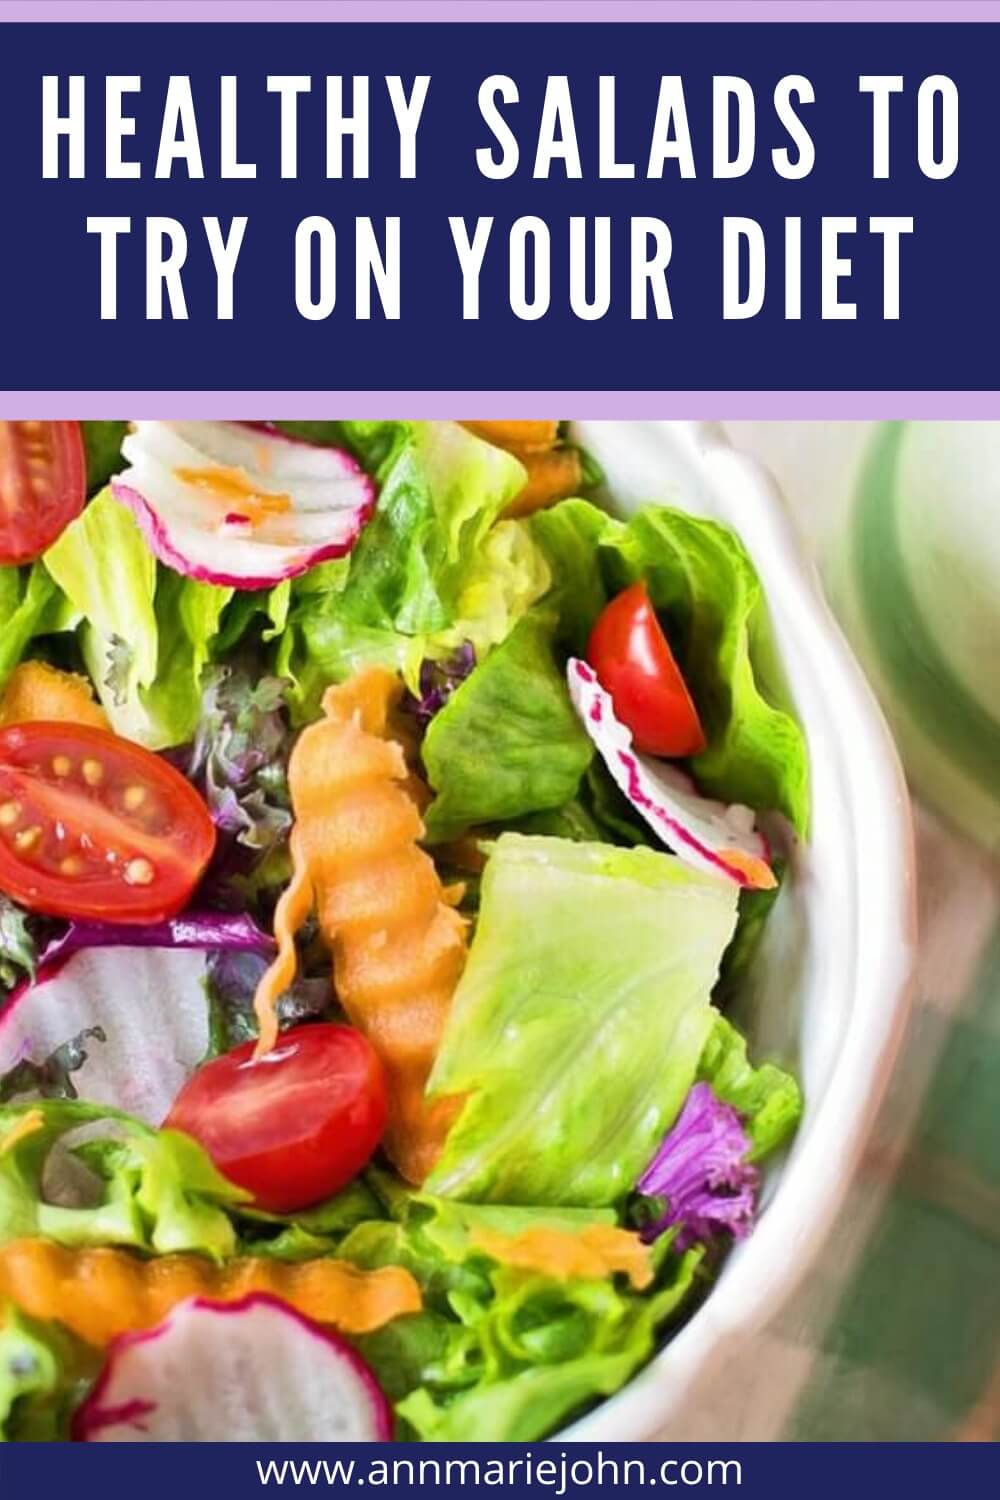 Healthy Salads to Try on Your Diet